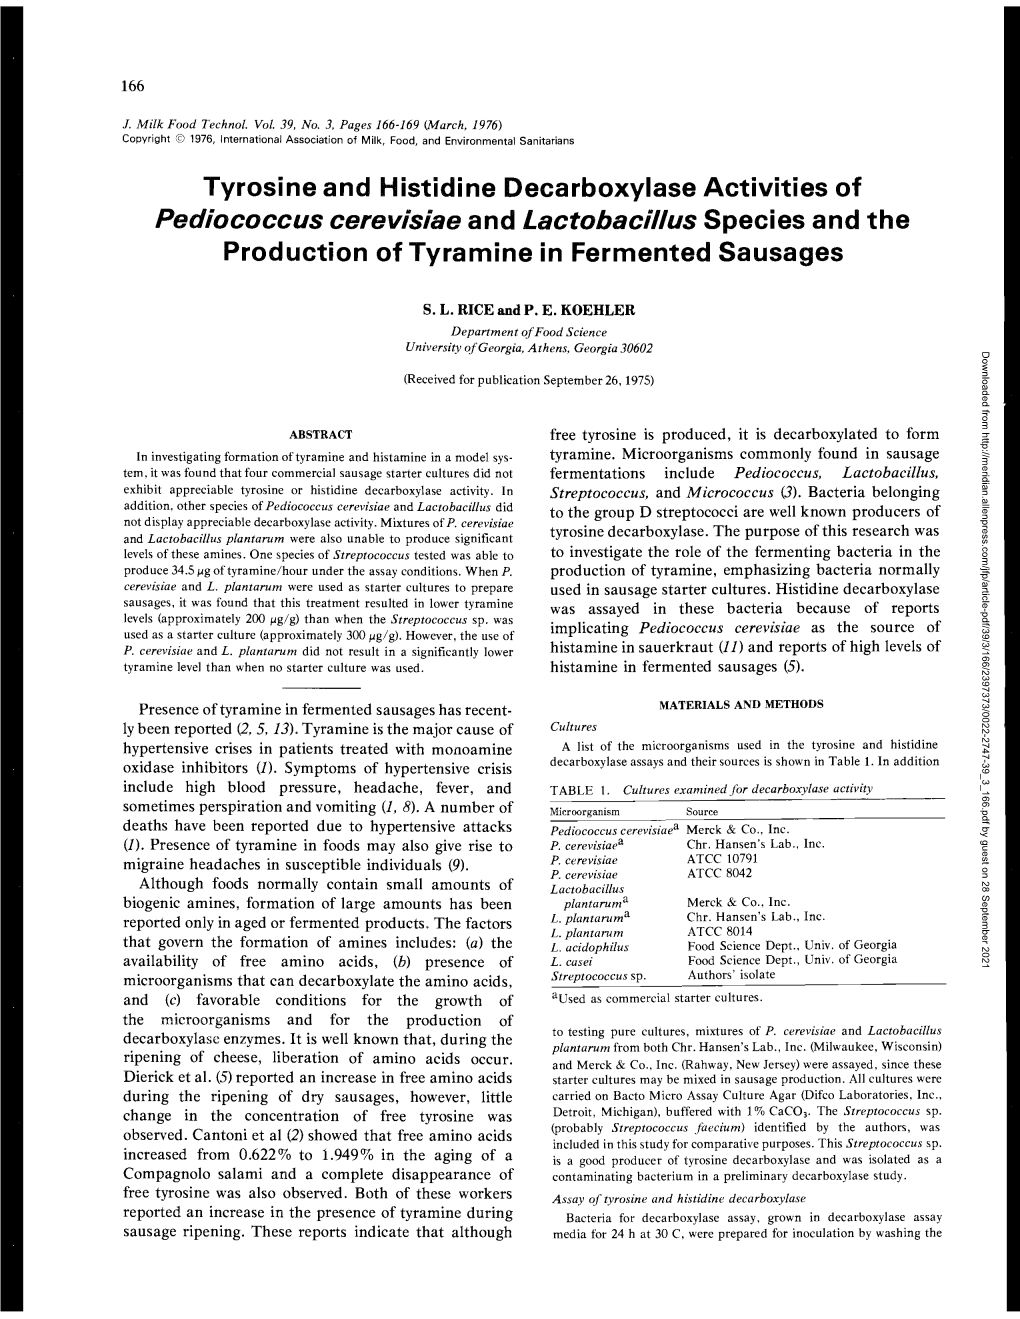 Tyrosine and Histidine Decarboxylase Activities of Pediococcus Cerevisiae and Lactobacillus Species and the Production of Tyramine in Fermented Sausages